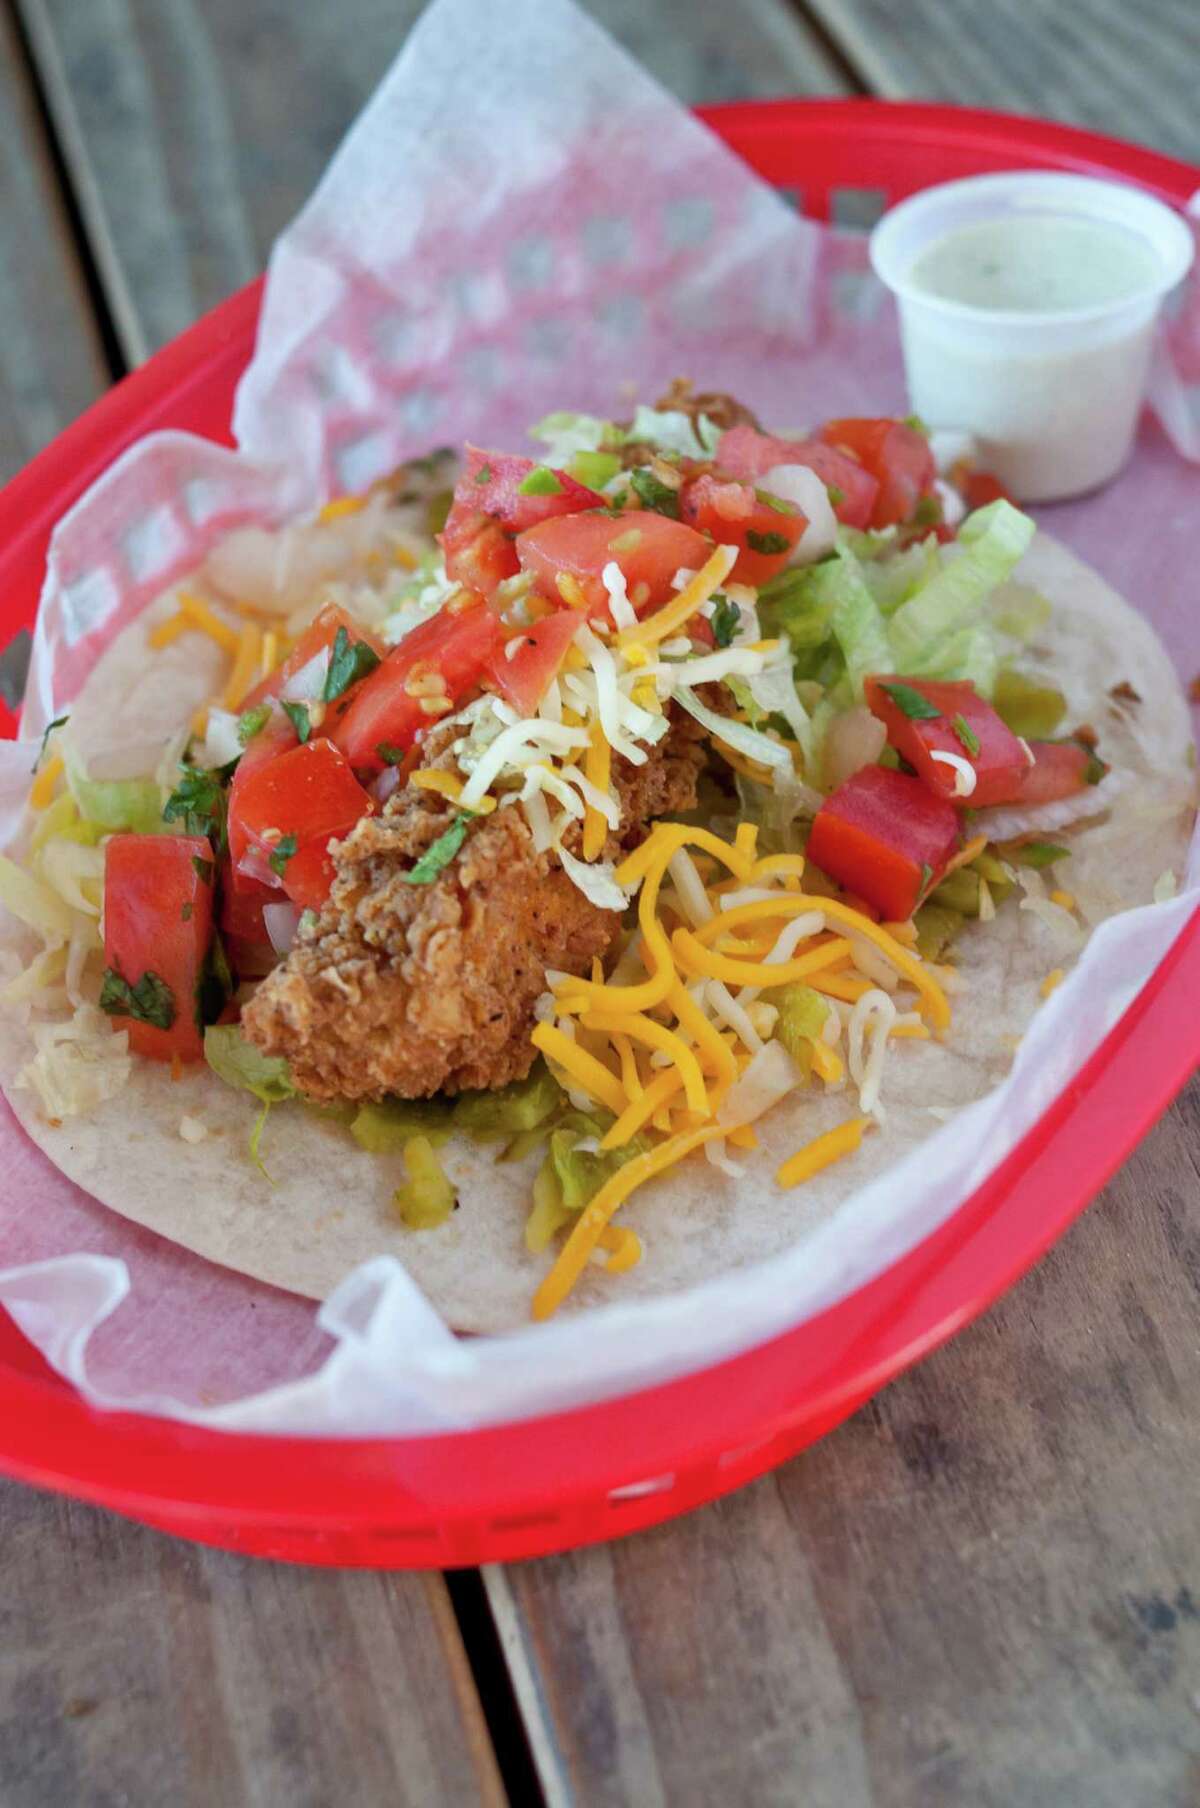 Trailer Park from Torchy's Tacos